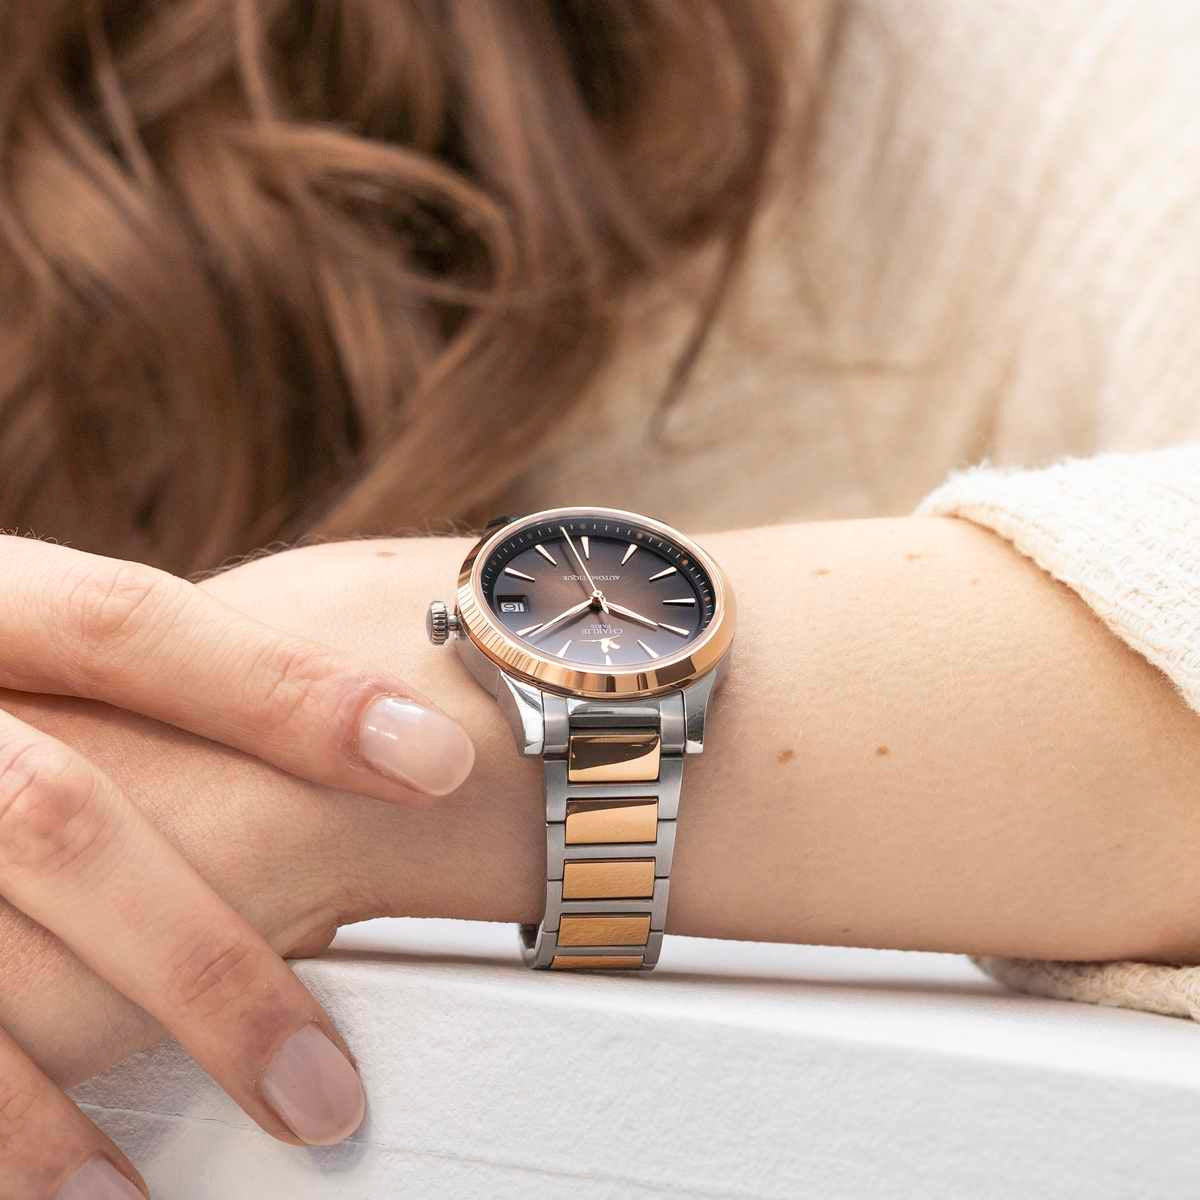 Aurore - Automatic Date - Gold &amp; Brown